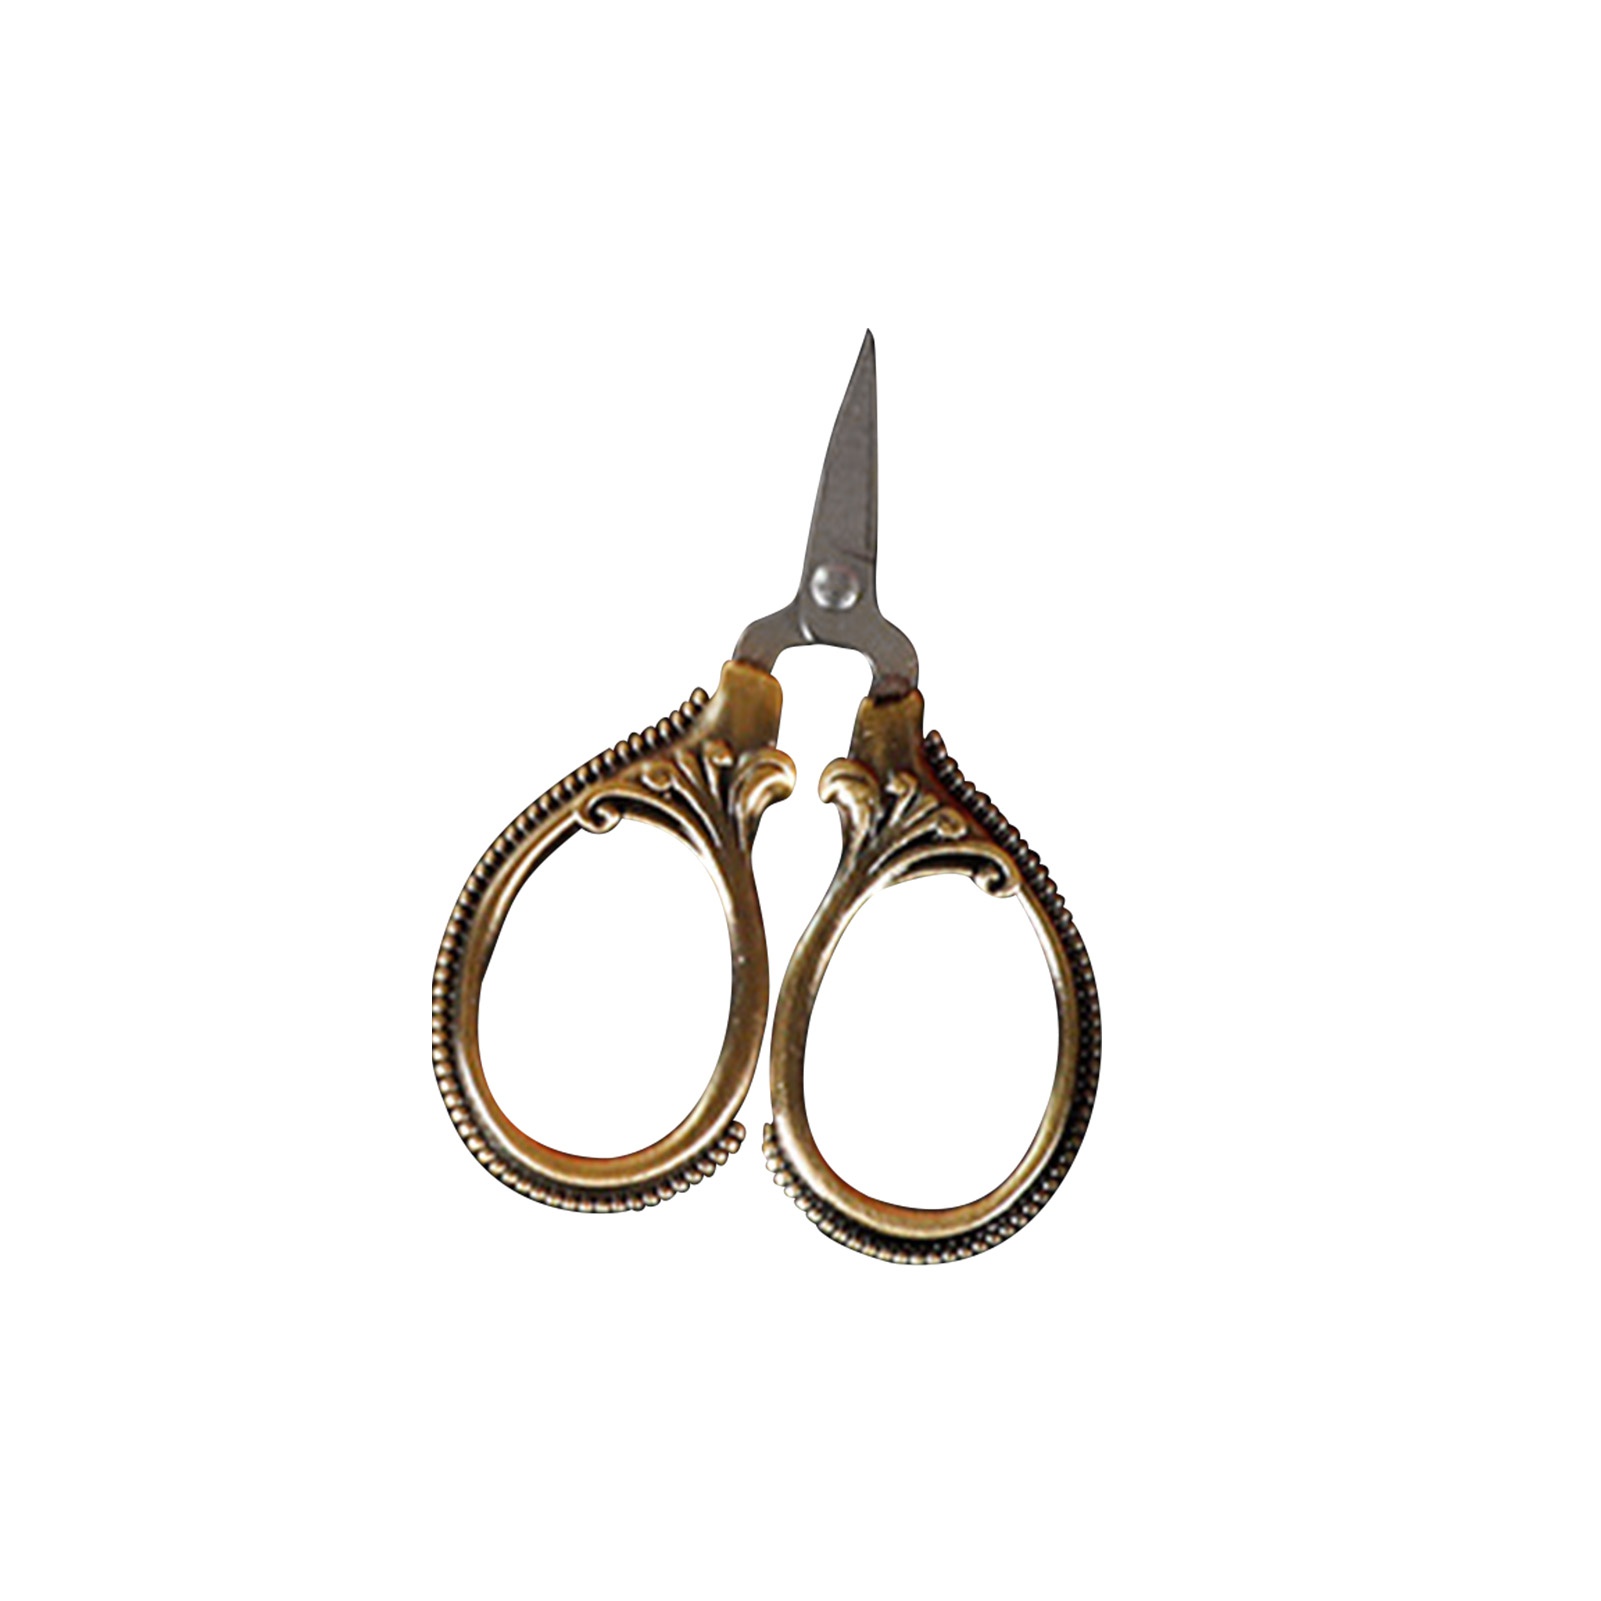  Sewing Scissors Small Scissors Stainless Steel Antique